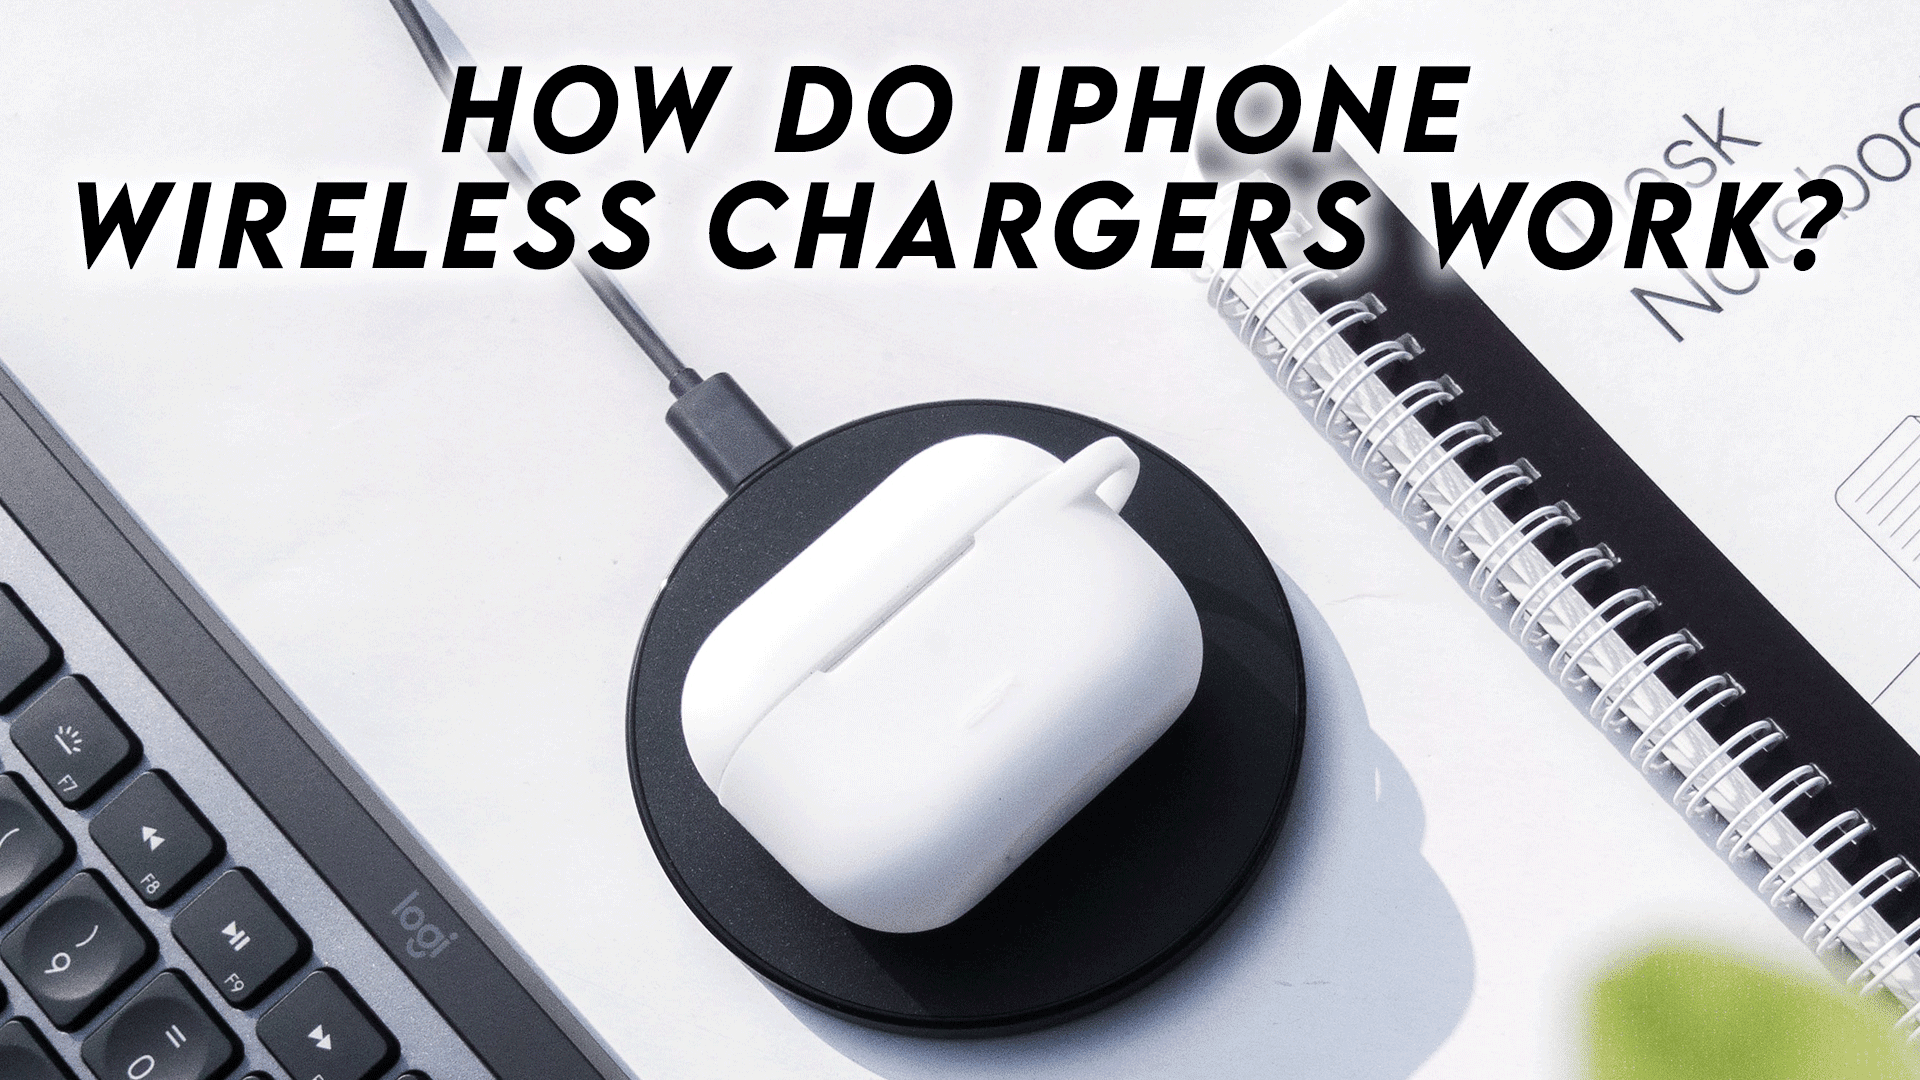 How Do IPhone Wireless Chargers Work?